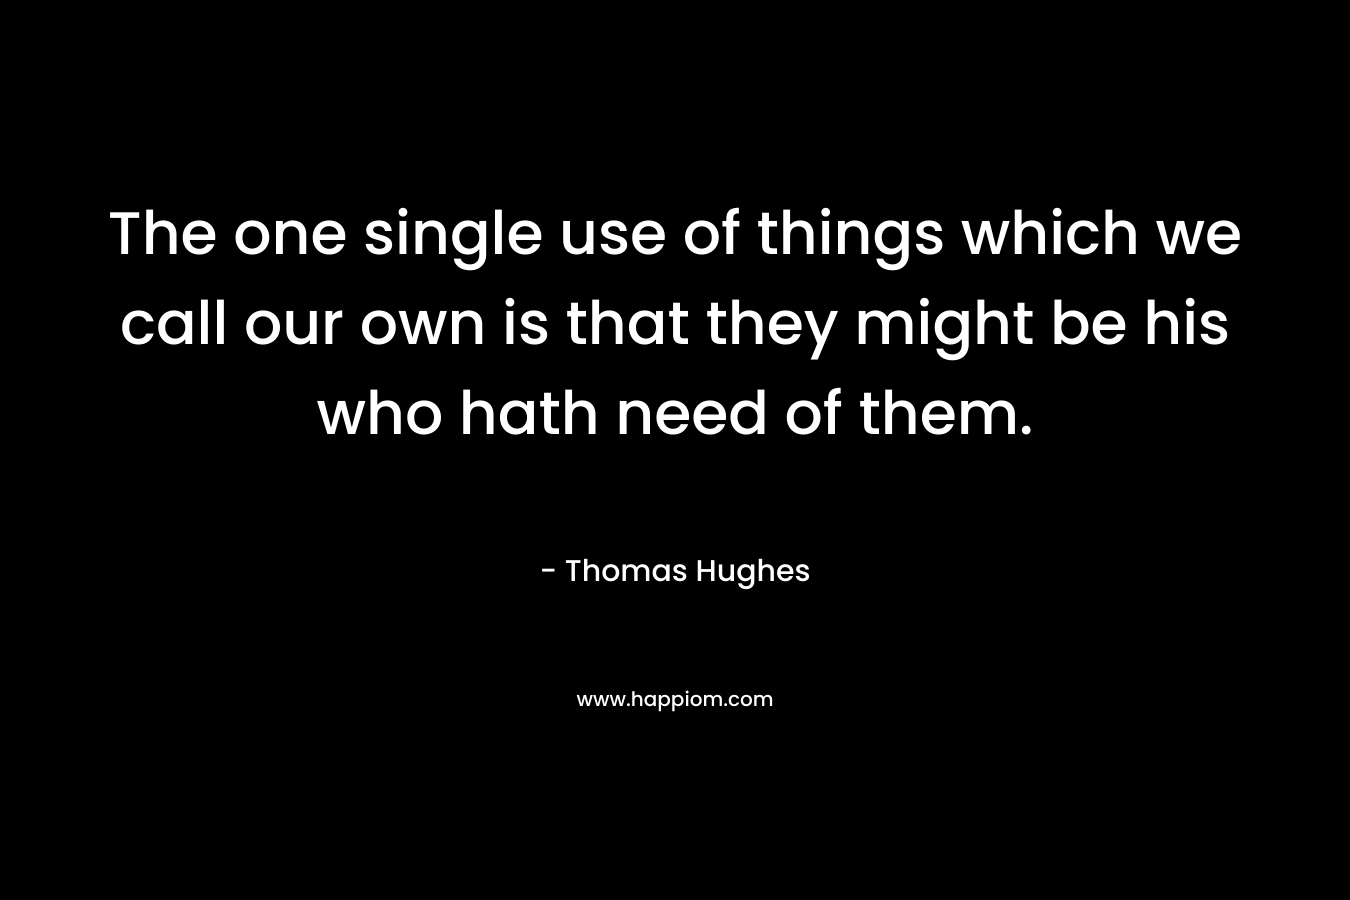 The one single use of things which we call our own is that they might be his who hath need of them. – Thomas Hughes